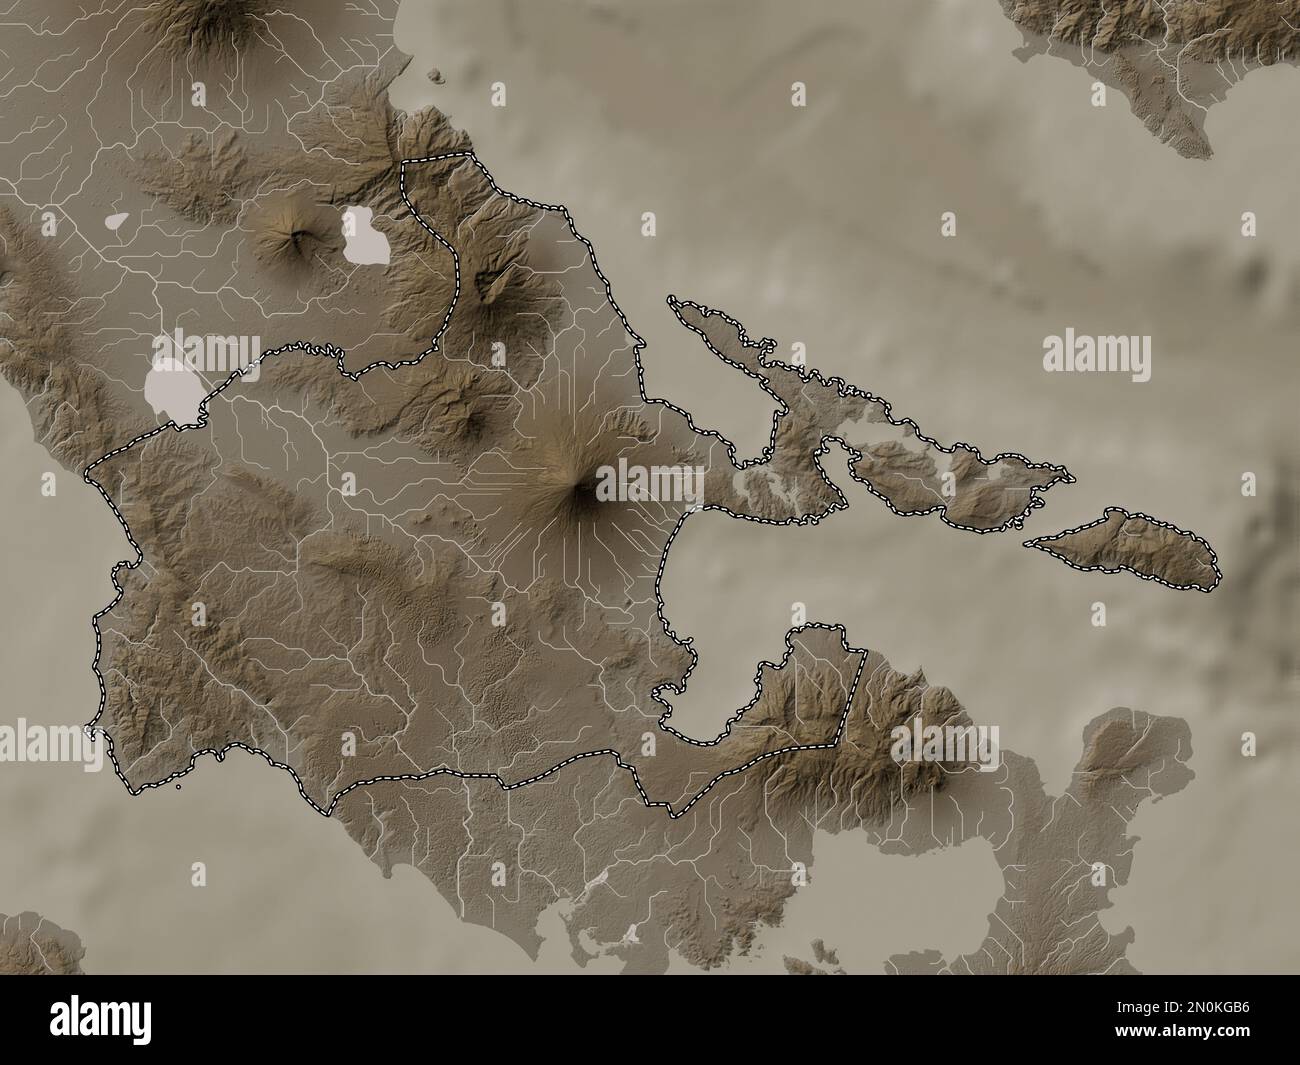 Albay, province of Philippines. Elevation map colored in sepia tones with lakes and rivers Stock Photo